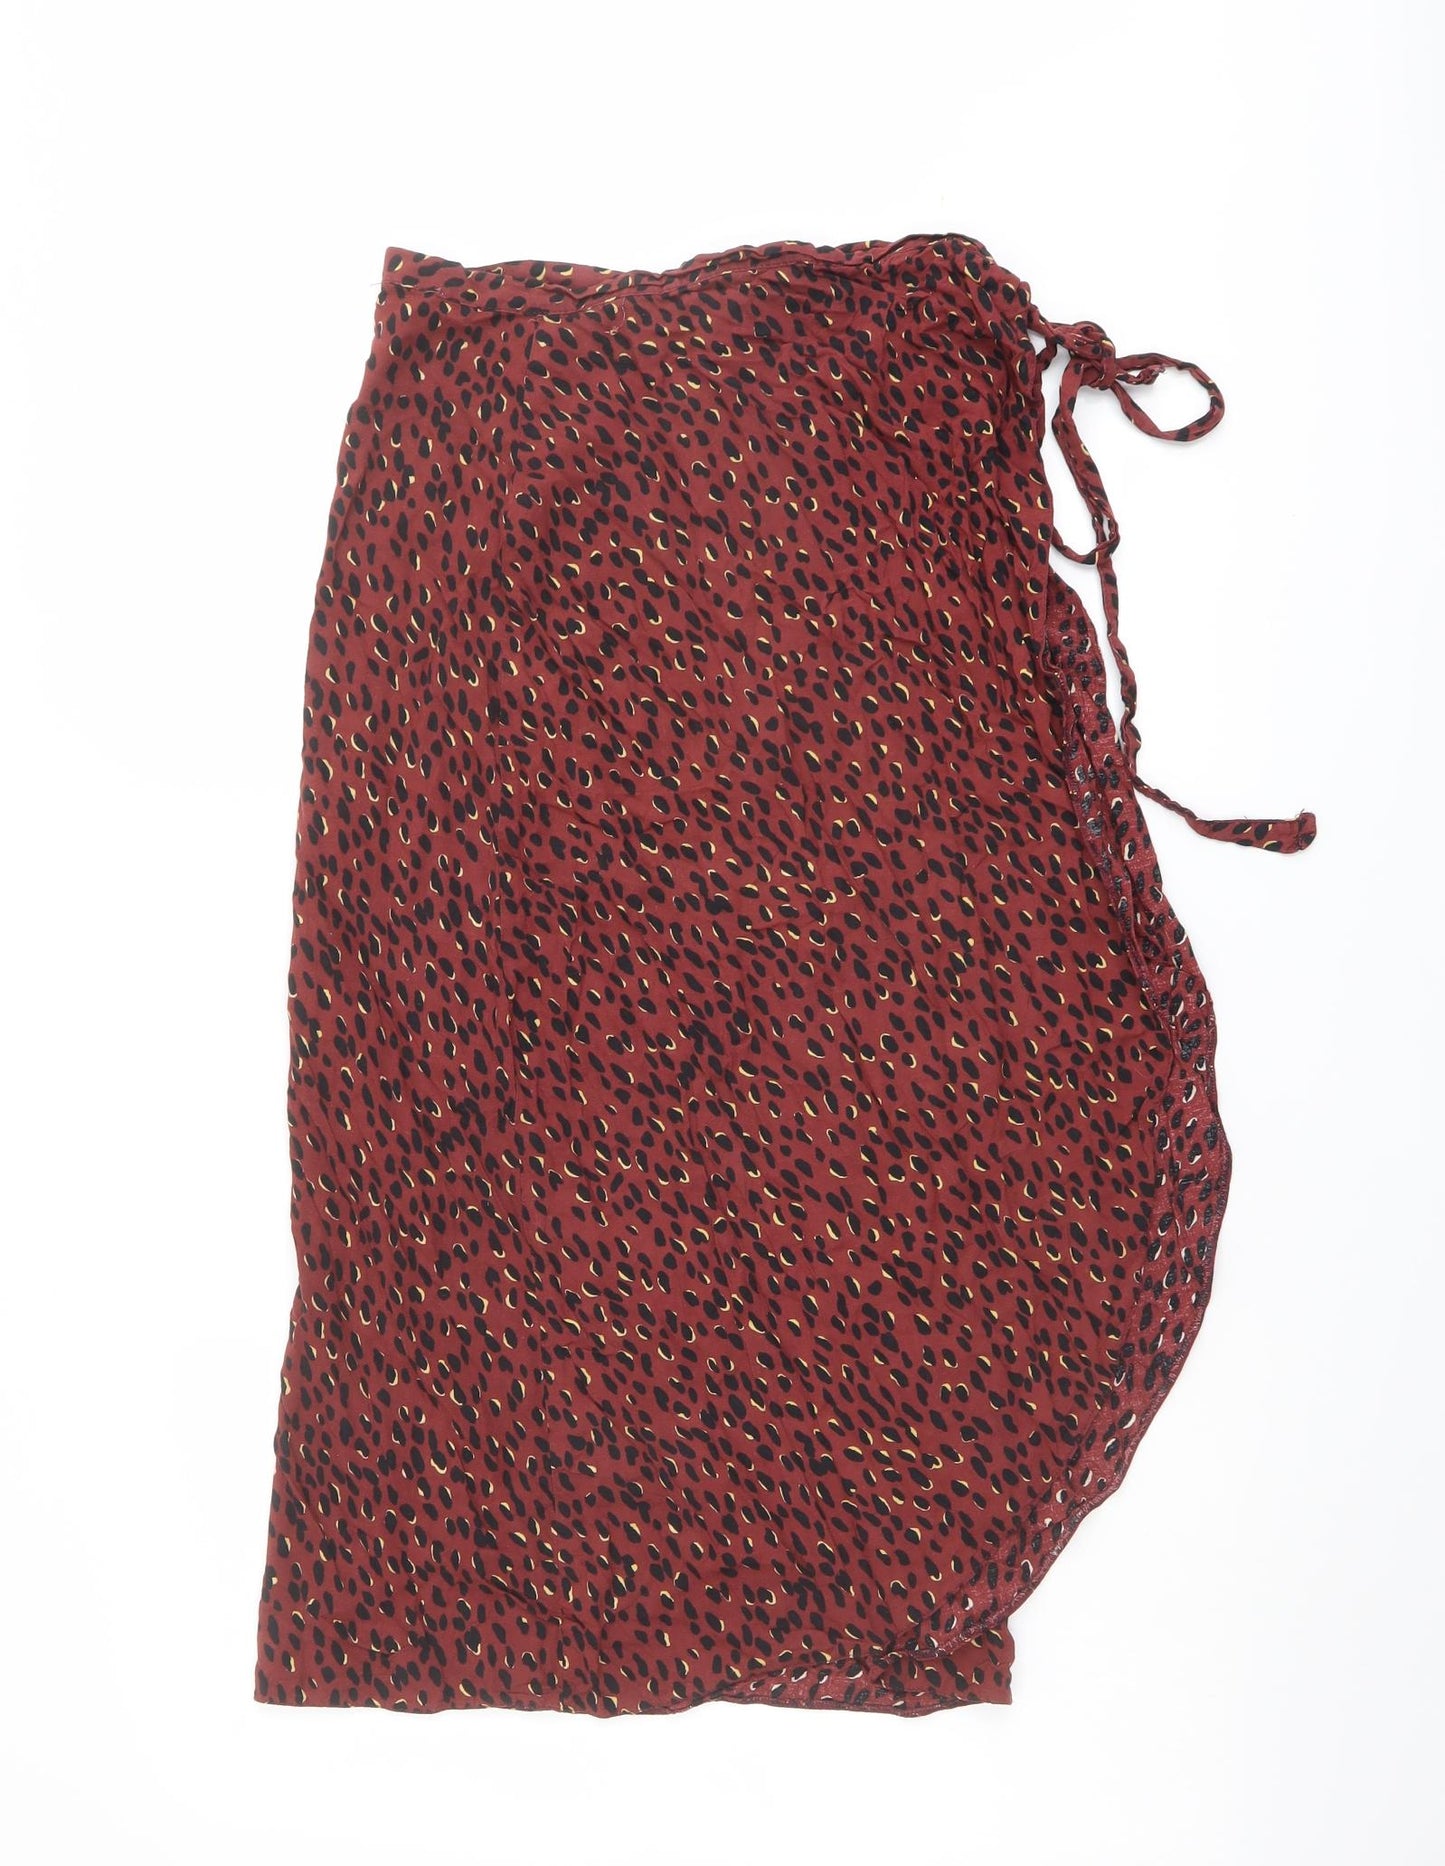 New Look Womens Red Animal Print Viscose Wrap Skirt Size 6 Tie - Leopard pattern